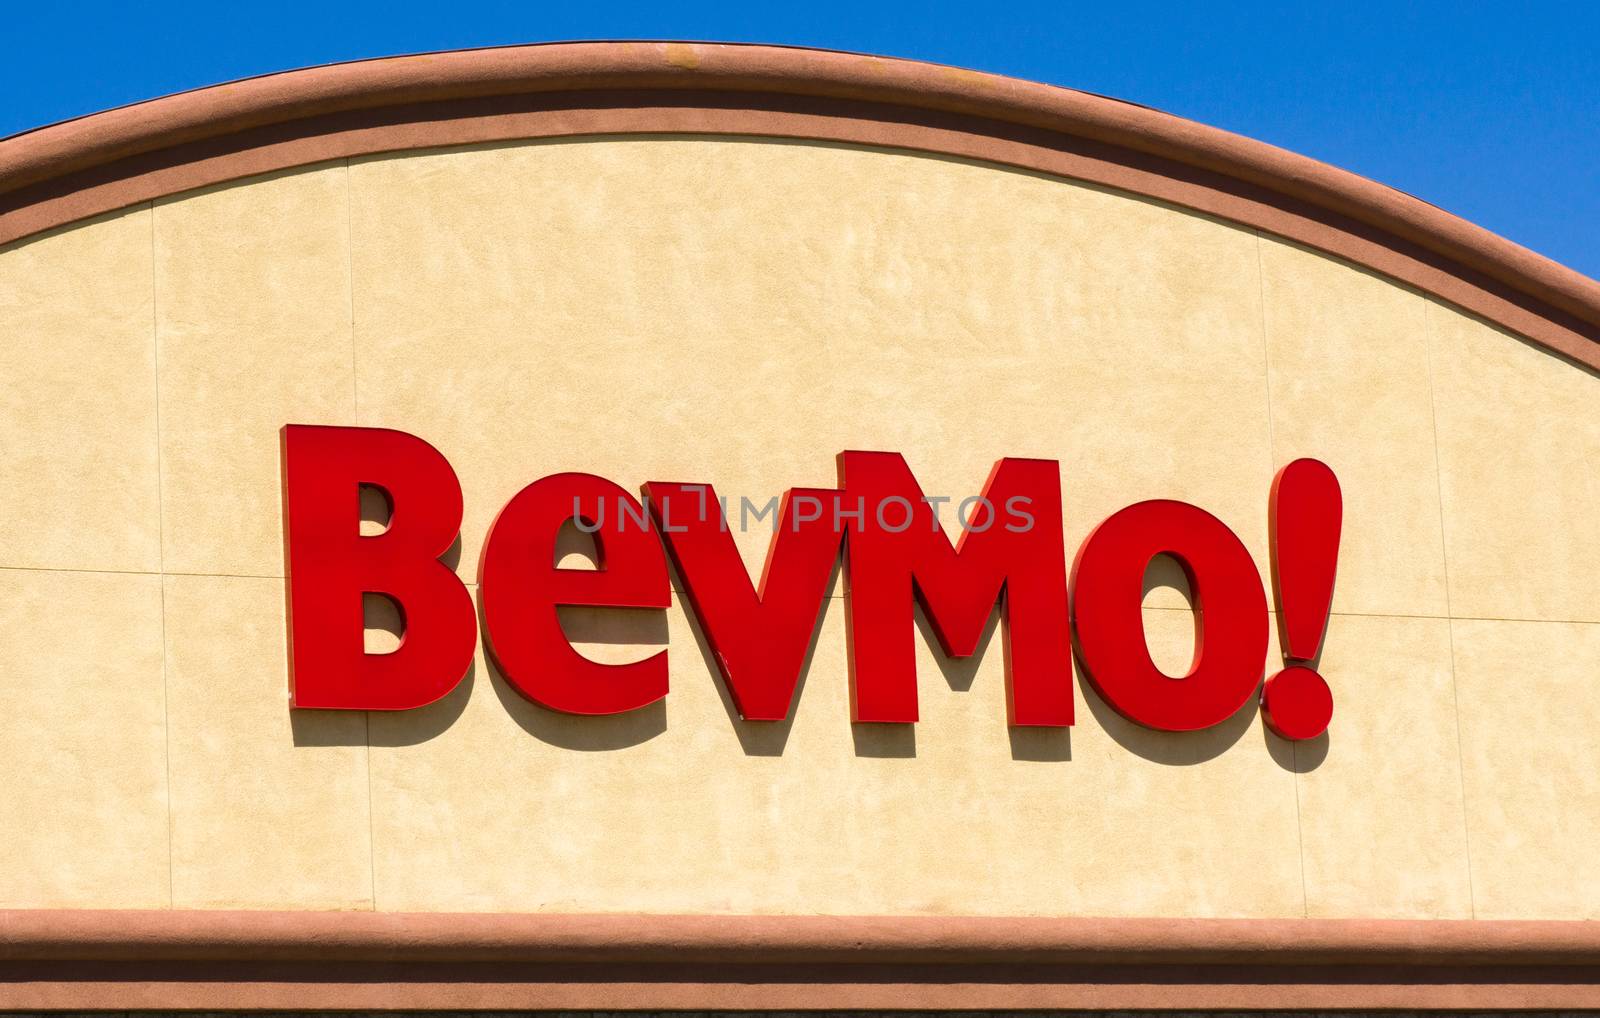 PALMDALE, CA/USA - APRIL 23, 2016: BevMo retail store and sign. BevMo is a superstore retailer of alcoholic beverages.